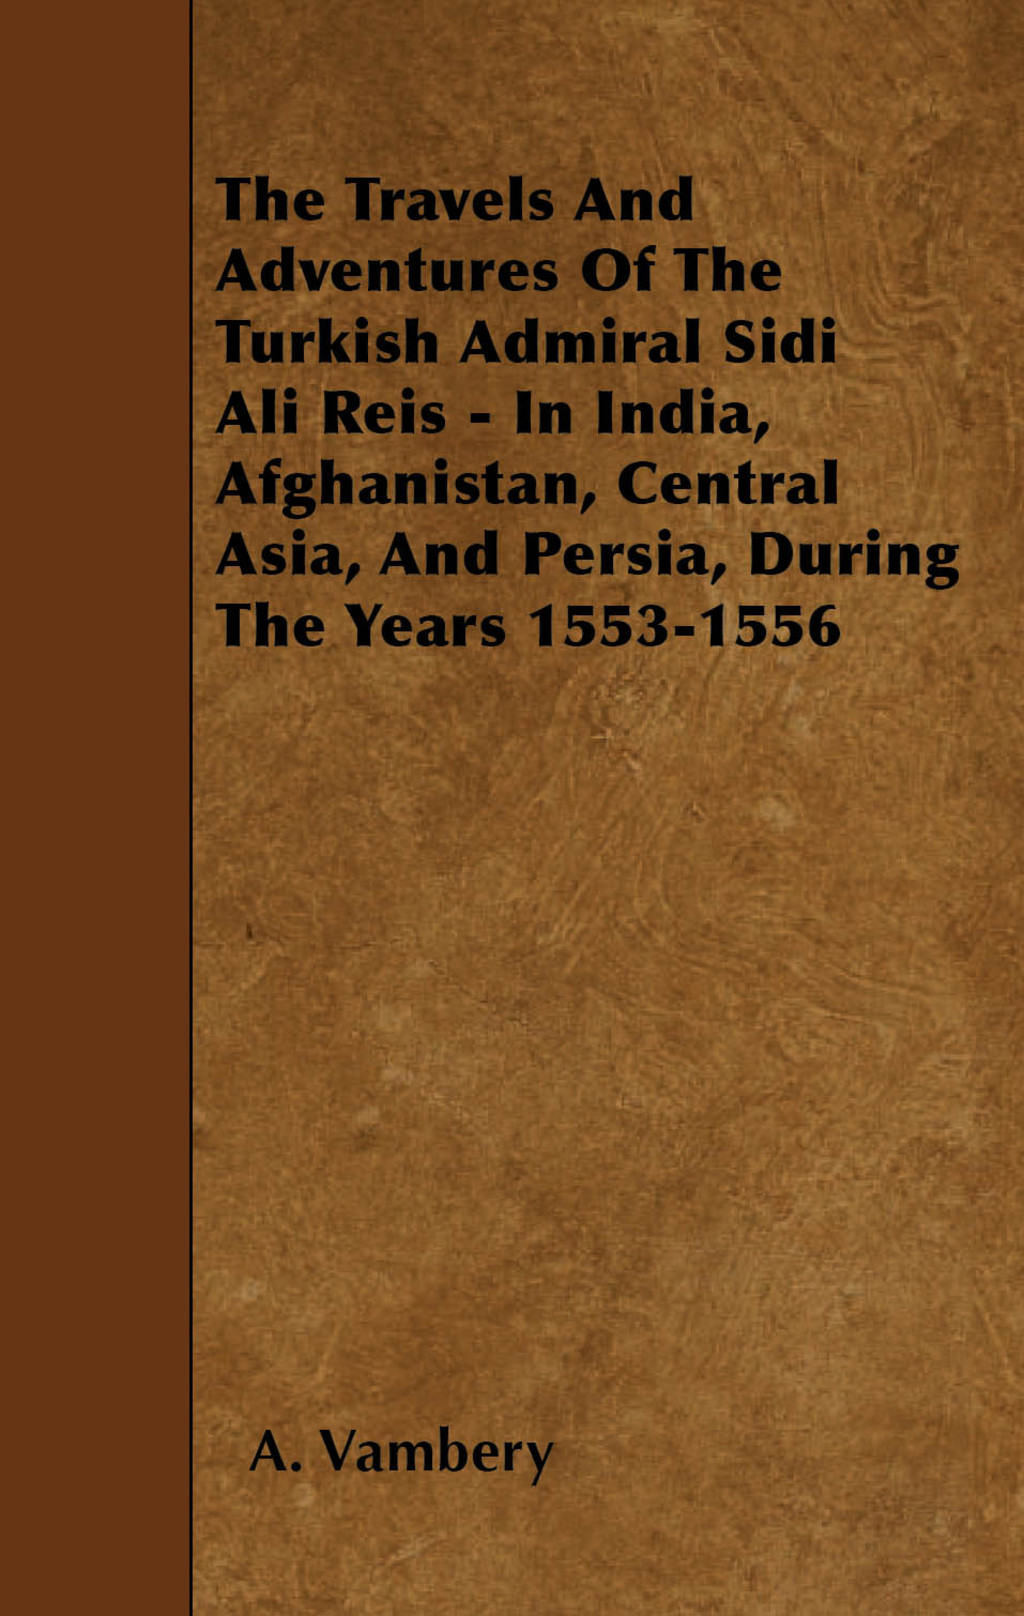 The Travels And Adventures Of The Turkish Admiral Sidi Ali Reis - In India  Afghanistan  Central Asia  And Persia  During (eBook) - A. Vambery